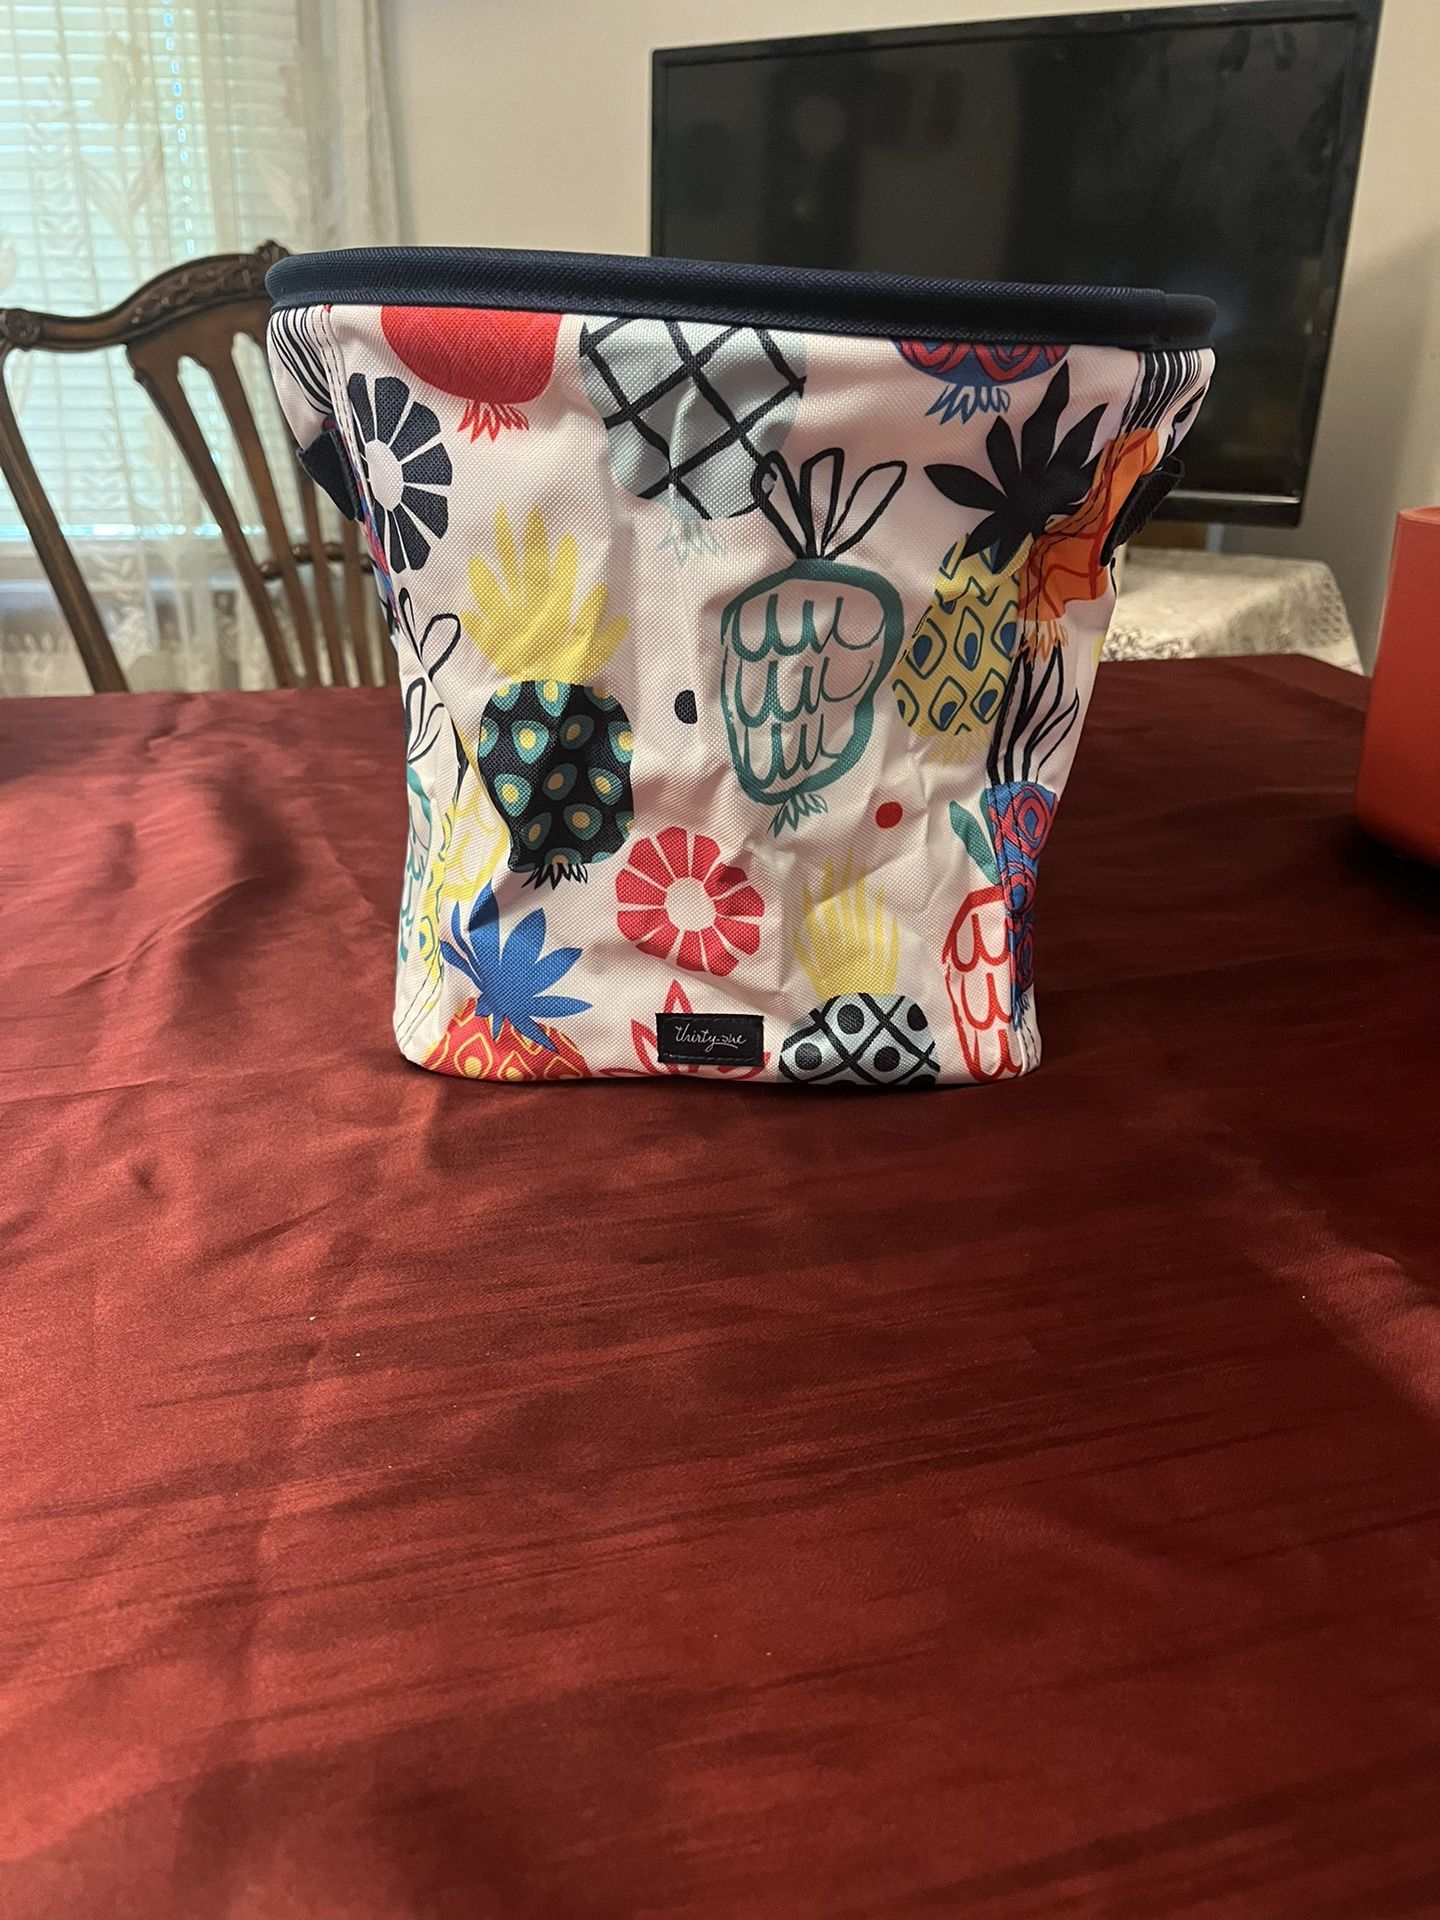 New thirty one Pineapple Tote